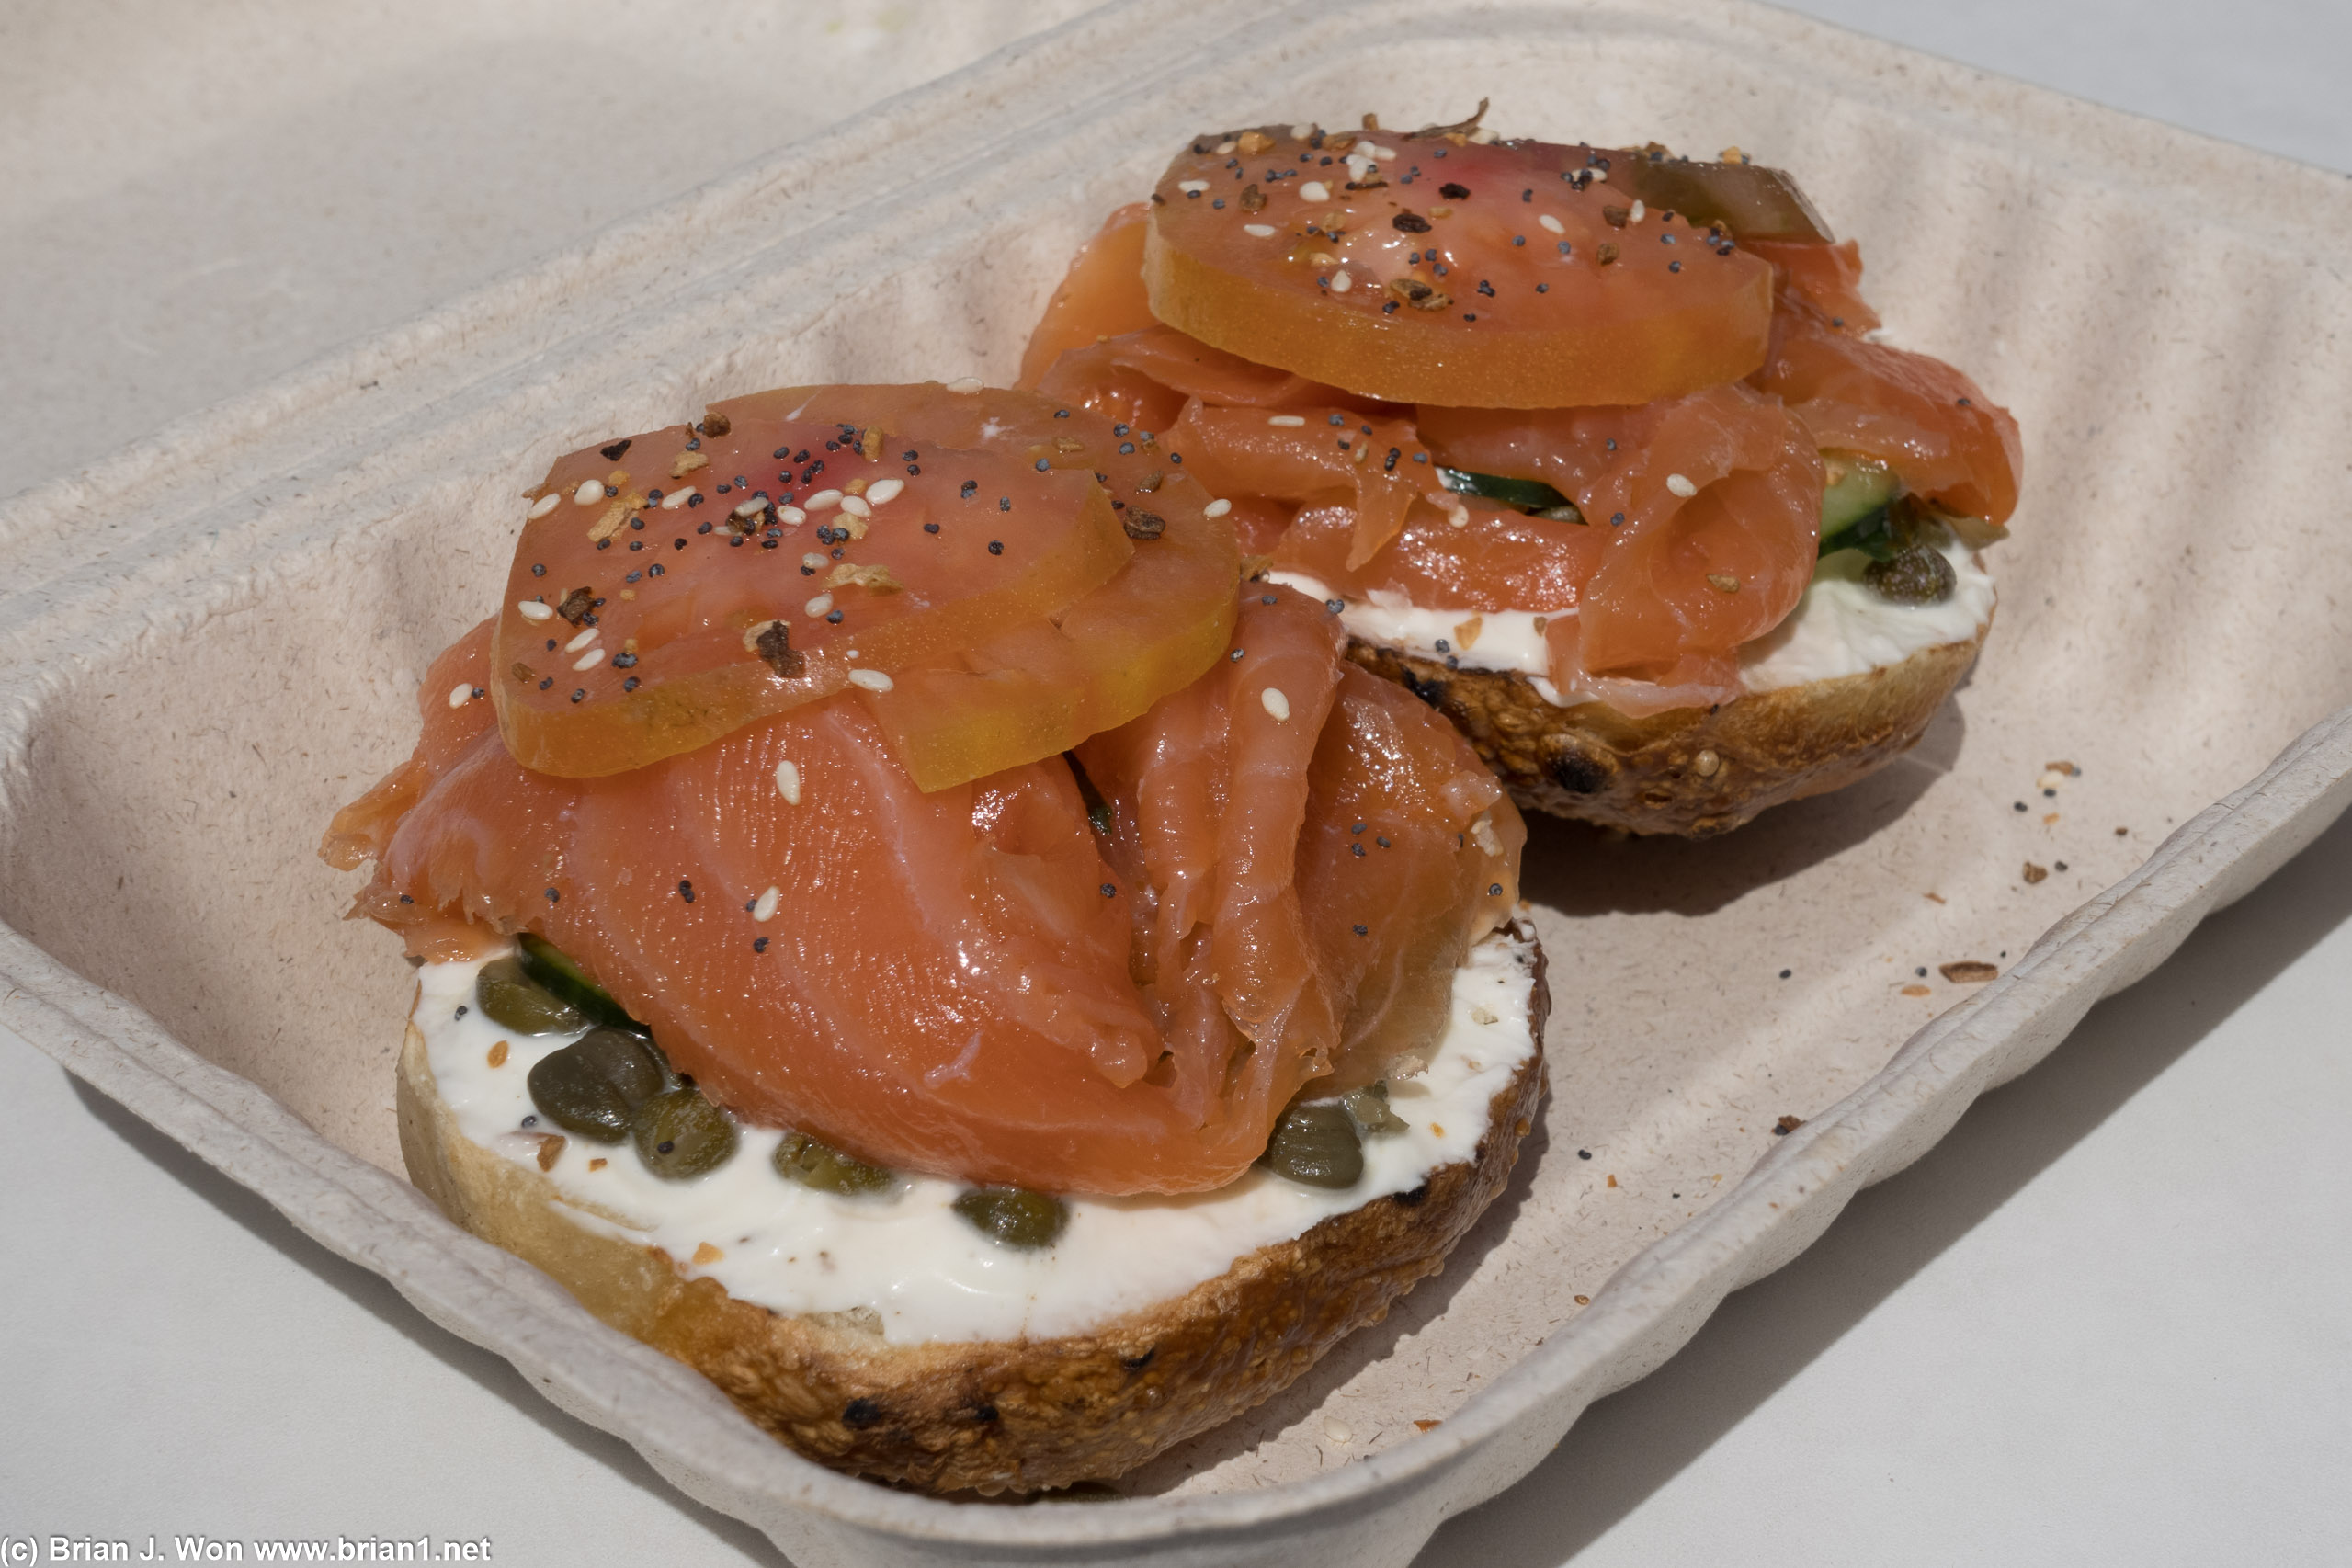 Plain bagel done up with lox, tomato, capers.